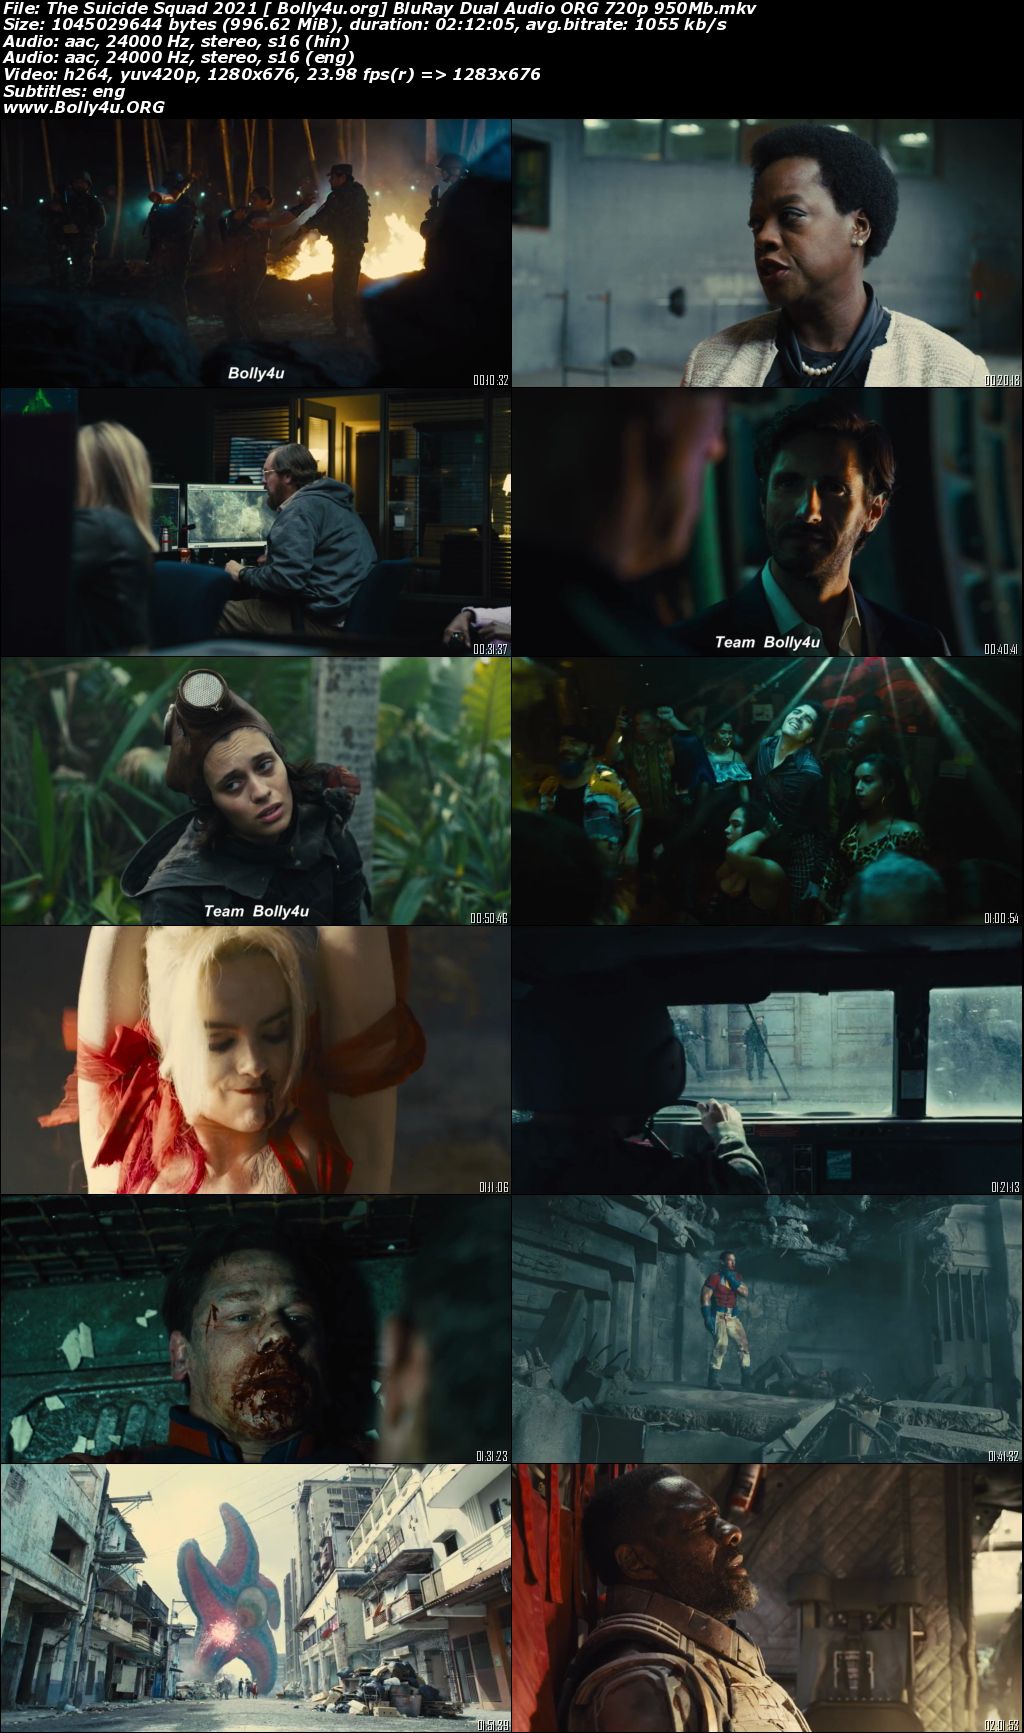 The Suicide Squad 2021 BluRay 450MB Hindi Dua Audio ORG 480p Download